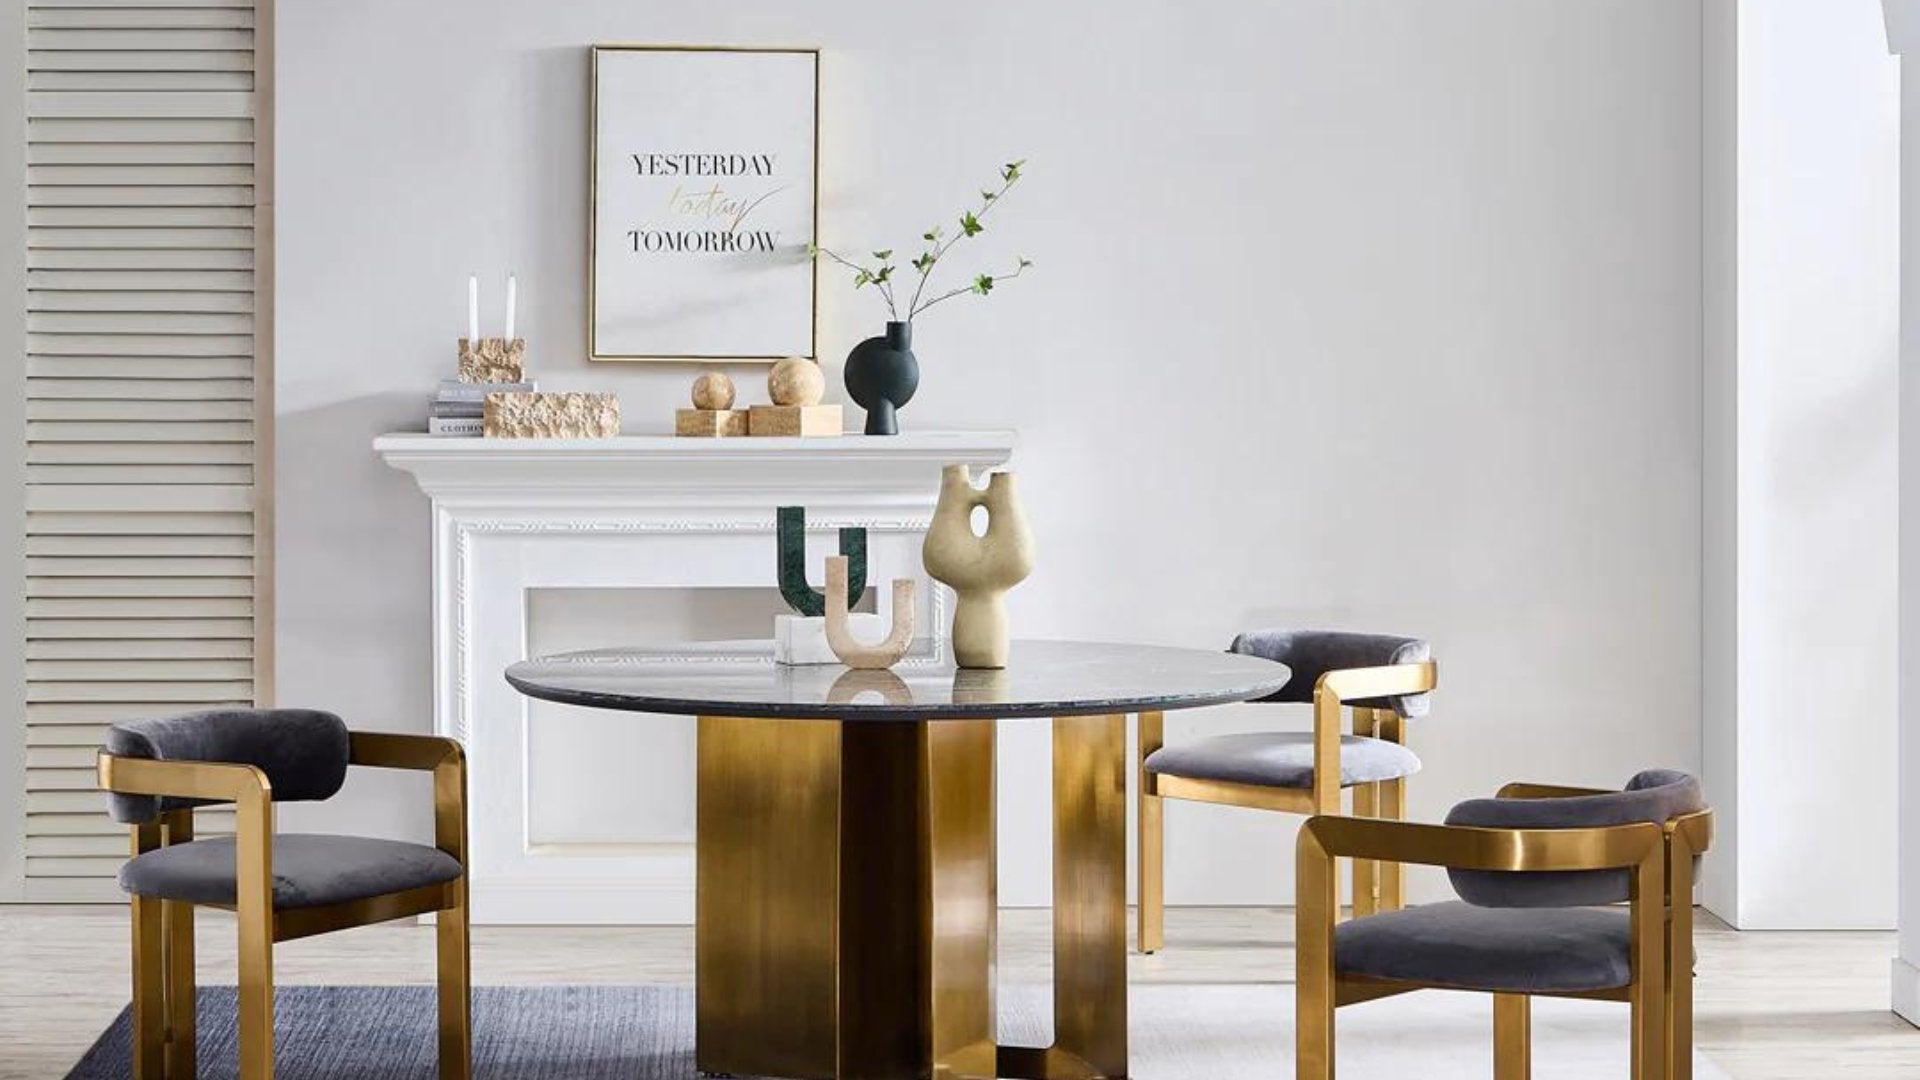 Homeware accents in dining area